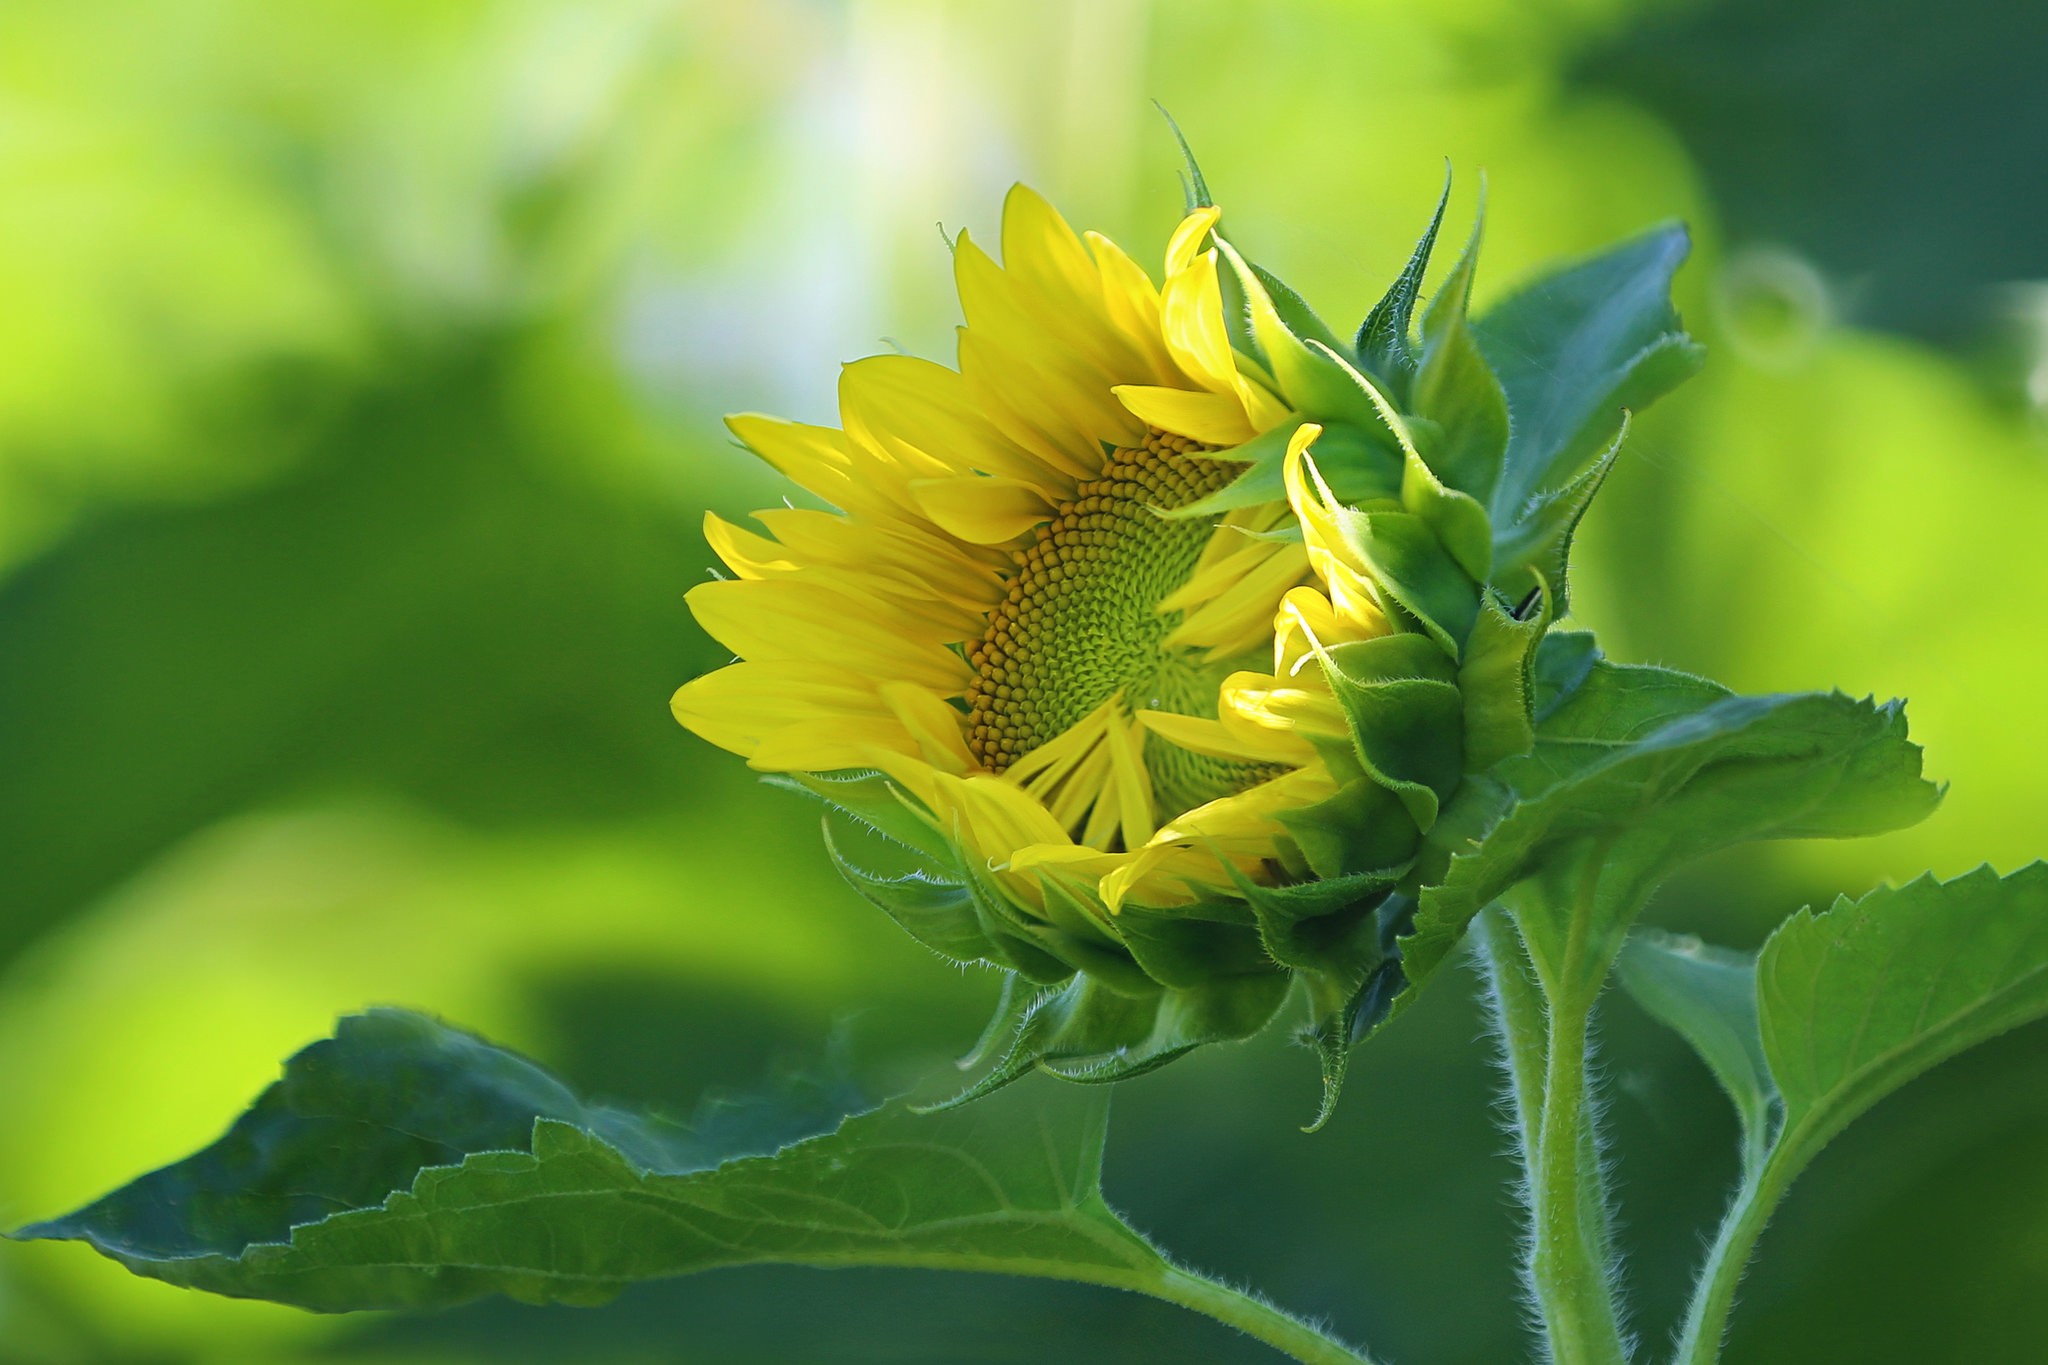 General 2048x1365 nature flowers sunflowers plants yellow flowers green background closeup